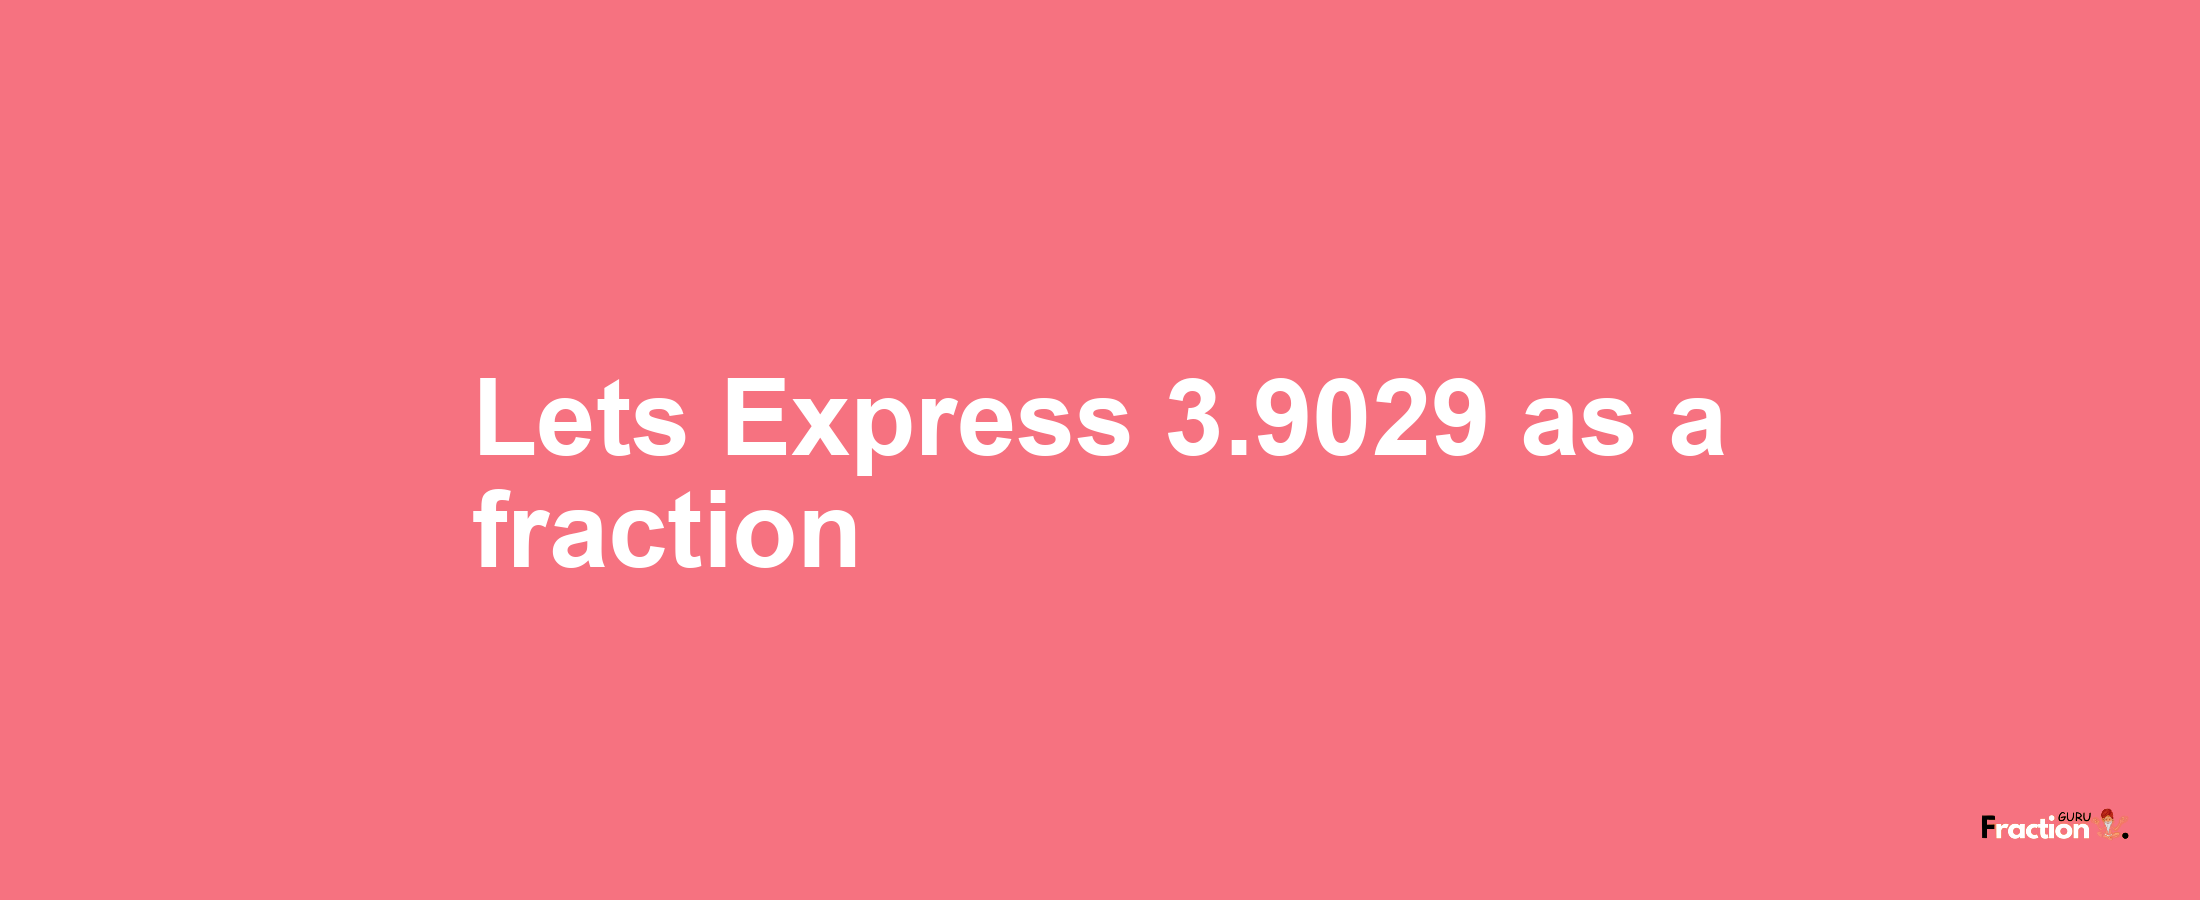 Lets Express 3.9029 as afraction